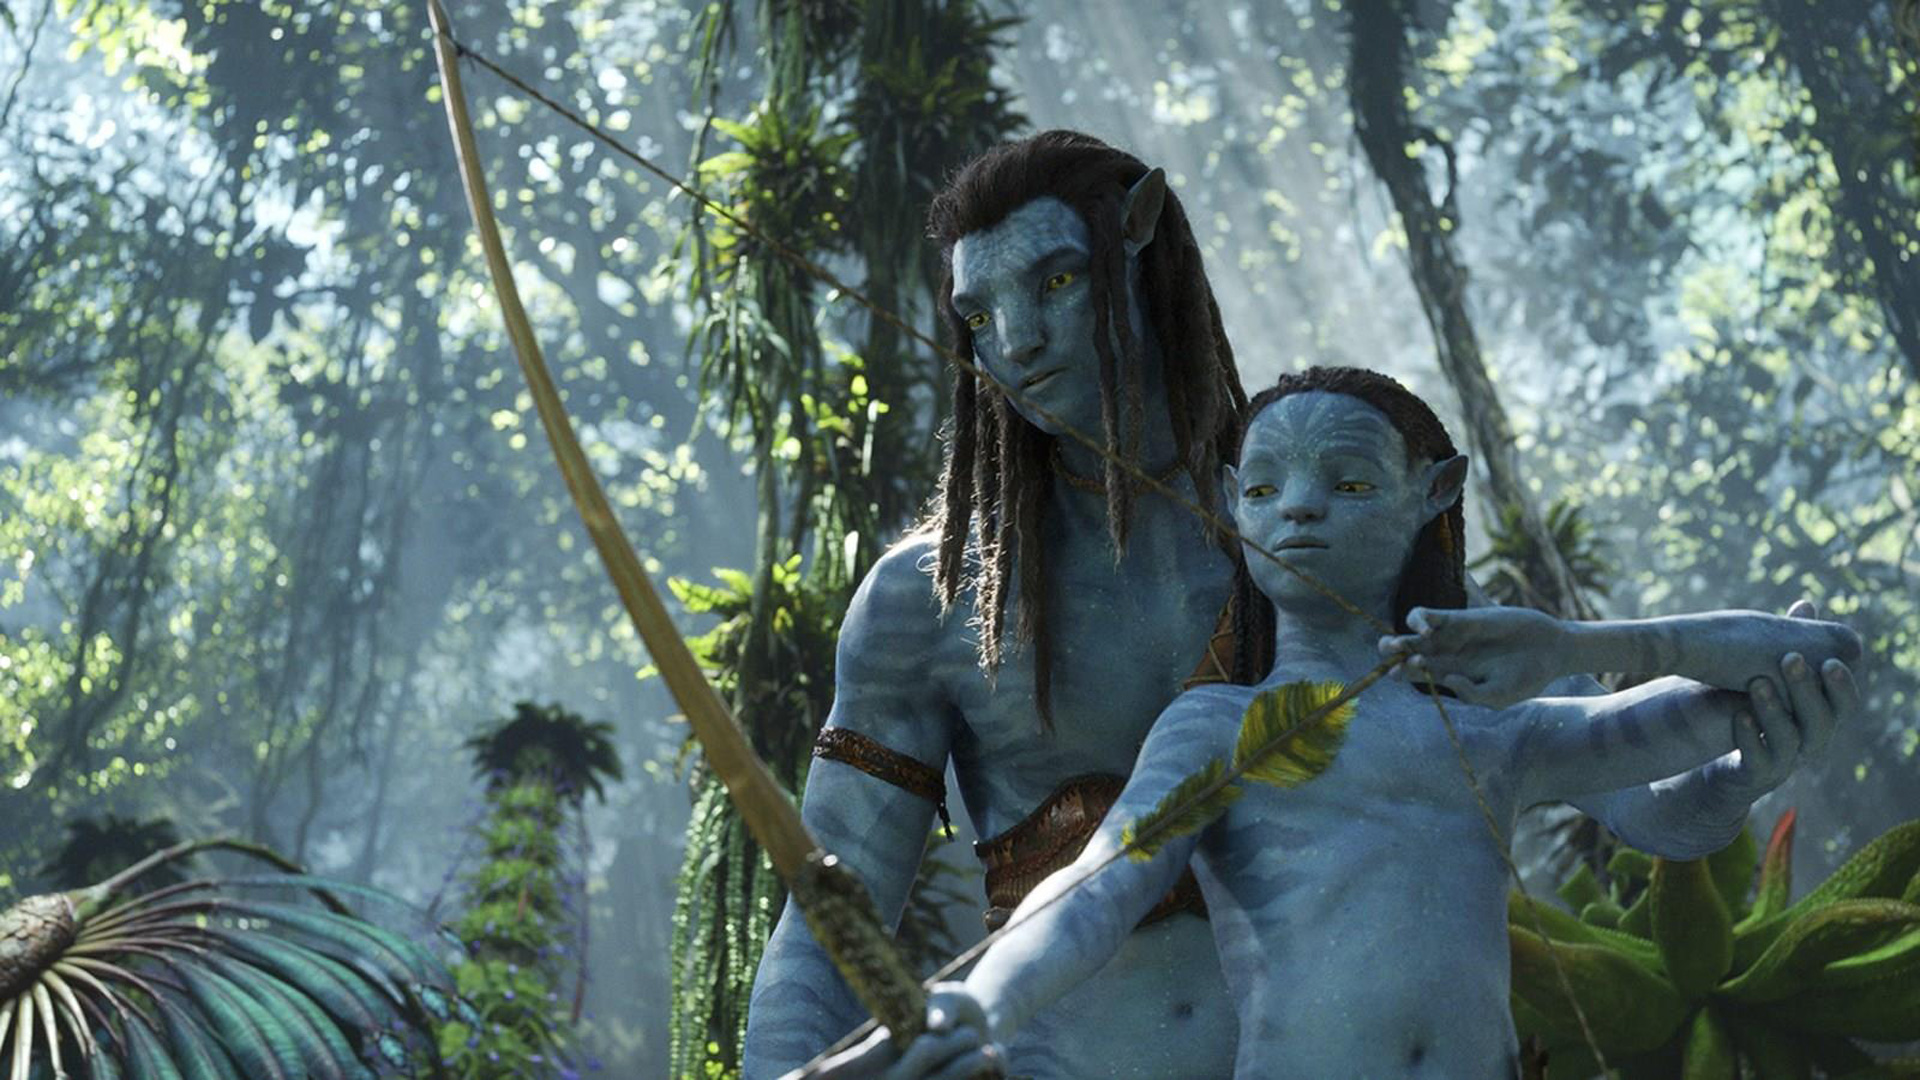 James Cameron Avatar 2 budget: How expensive is it?